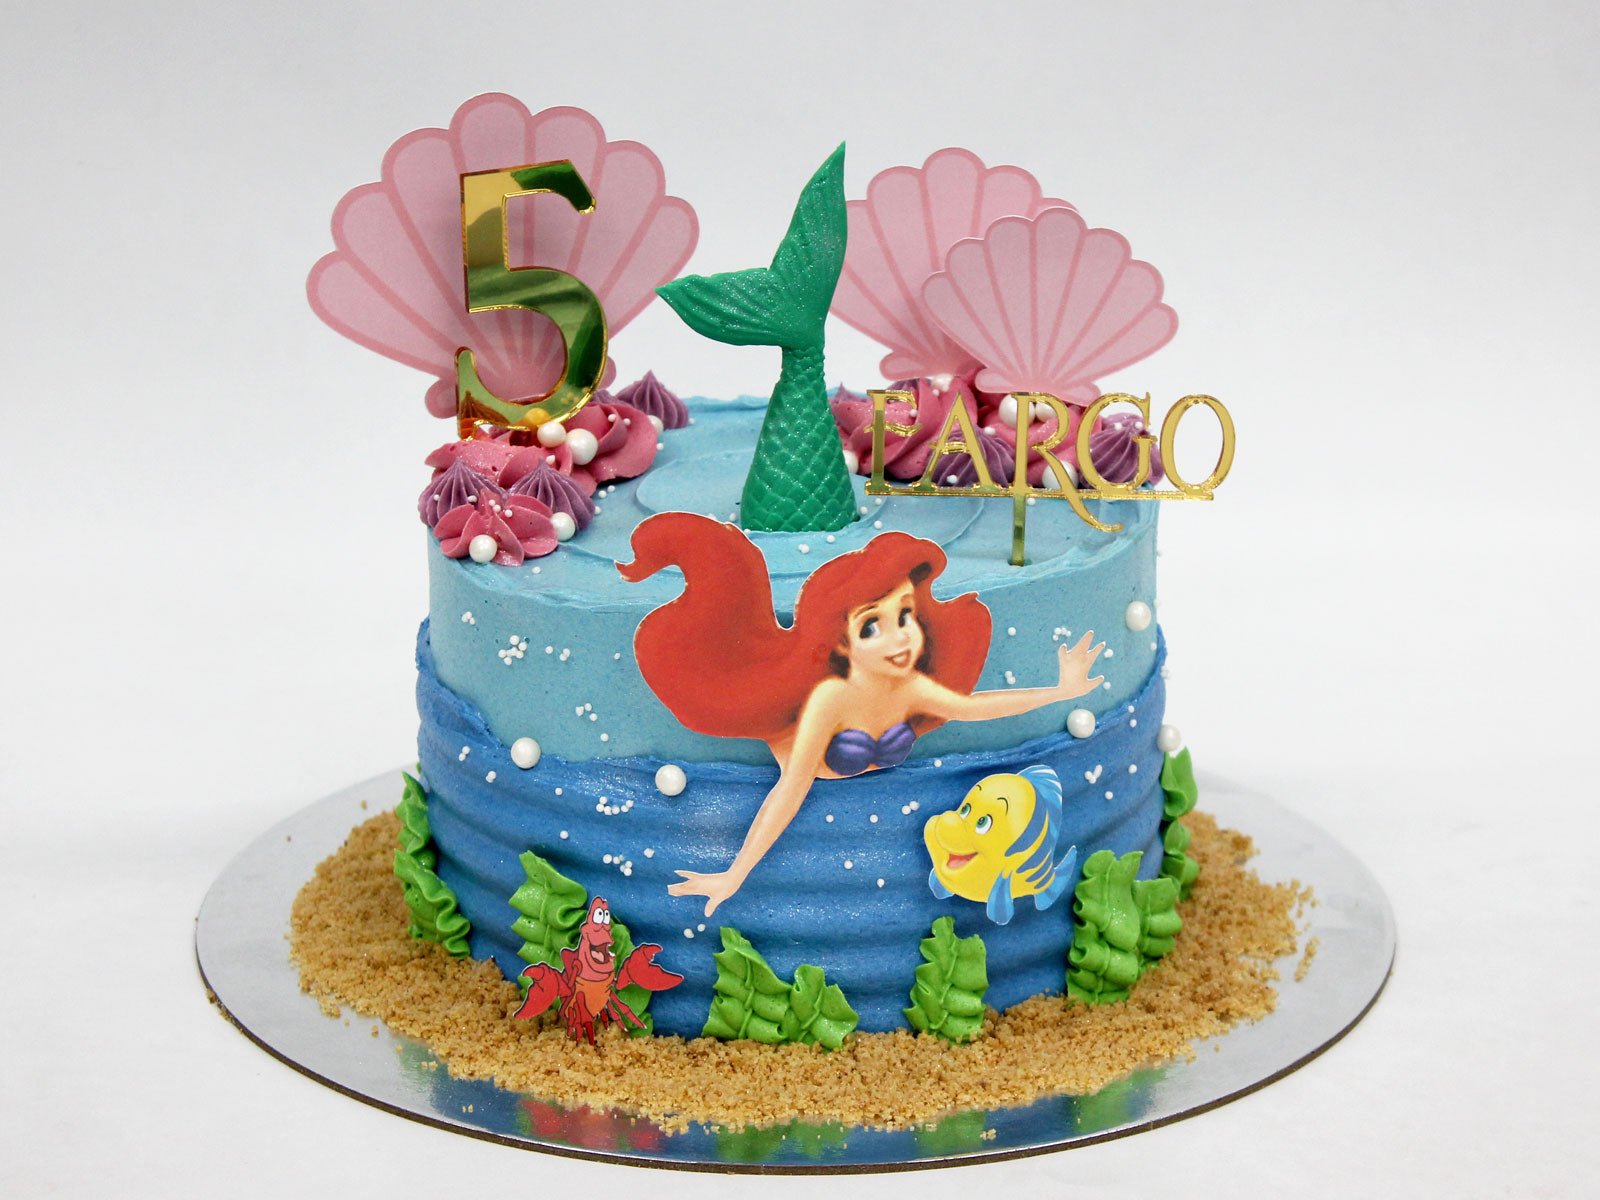 Frosted Art: Little Mermaid Barbie Doll Cake- Cake Decorating- How To